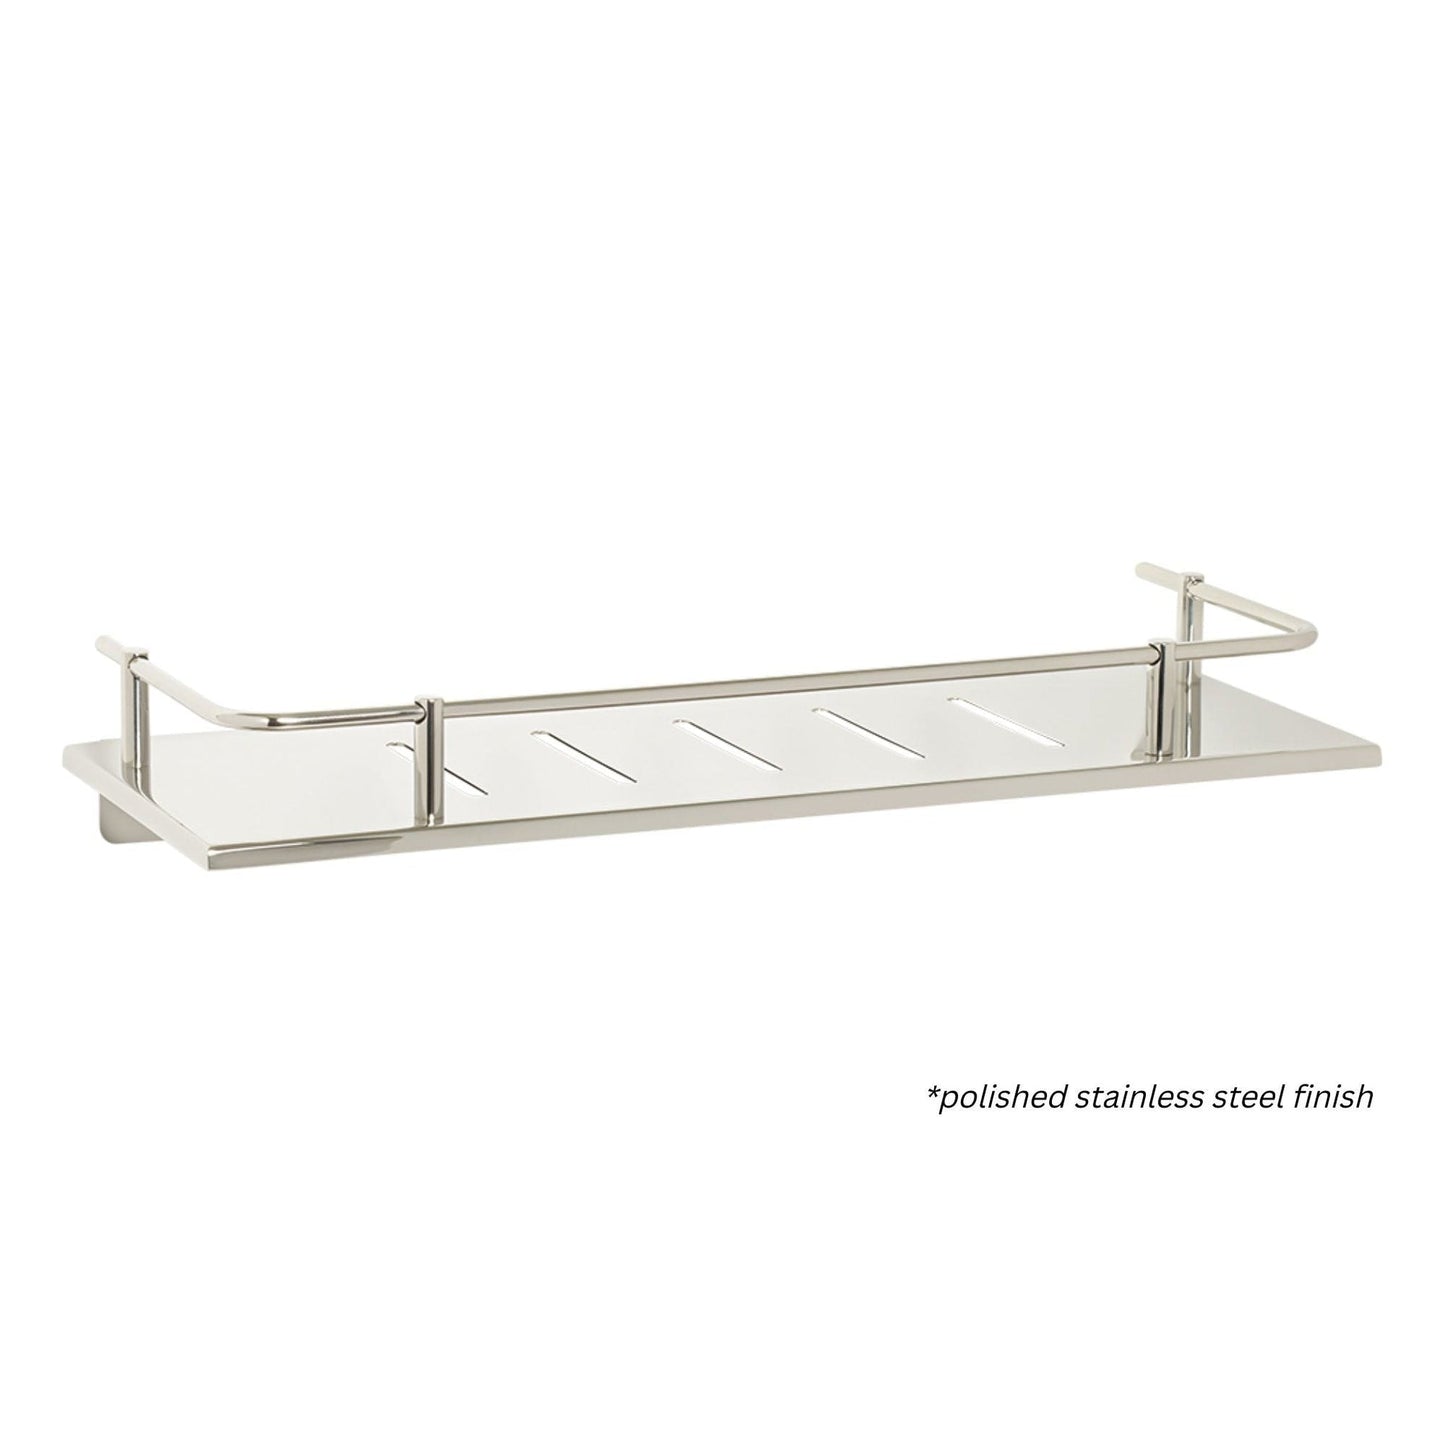 Seachrome Lifestyle and Wellness 720 Series 16" x 6" Rectangular Sundries Shower Shelf With Rail in White Wrinkle Powder Coated Stainless Finish